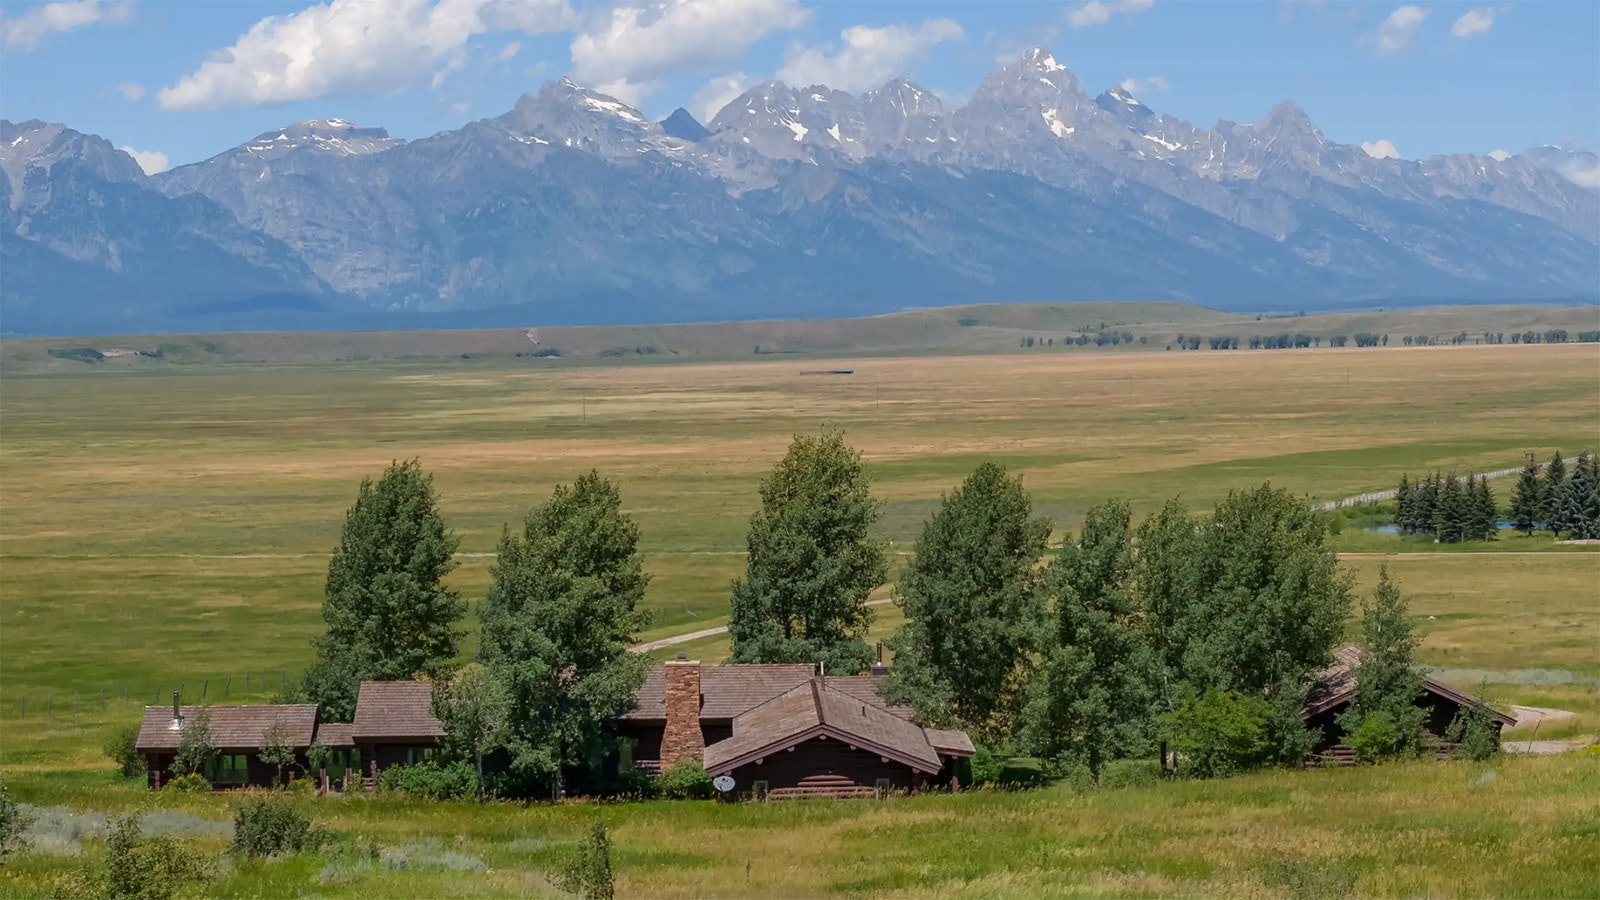 The legacy Wapiti View Ranch is a pristine 40 acres surrounded by the National Elk Refuge near the Grand Tetons. It recently listed for $17.9 million and was snatched up right away.